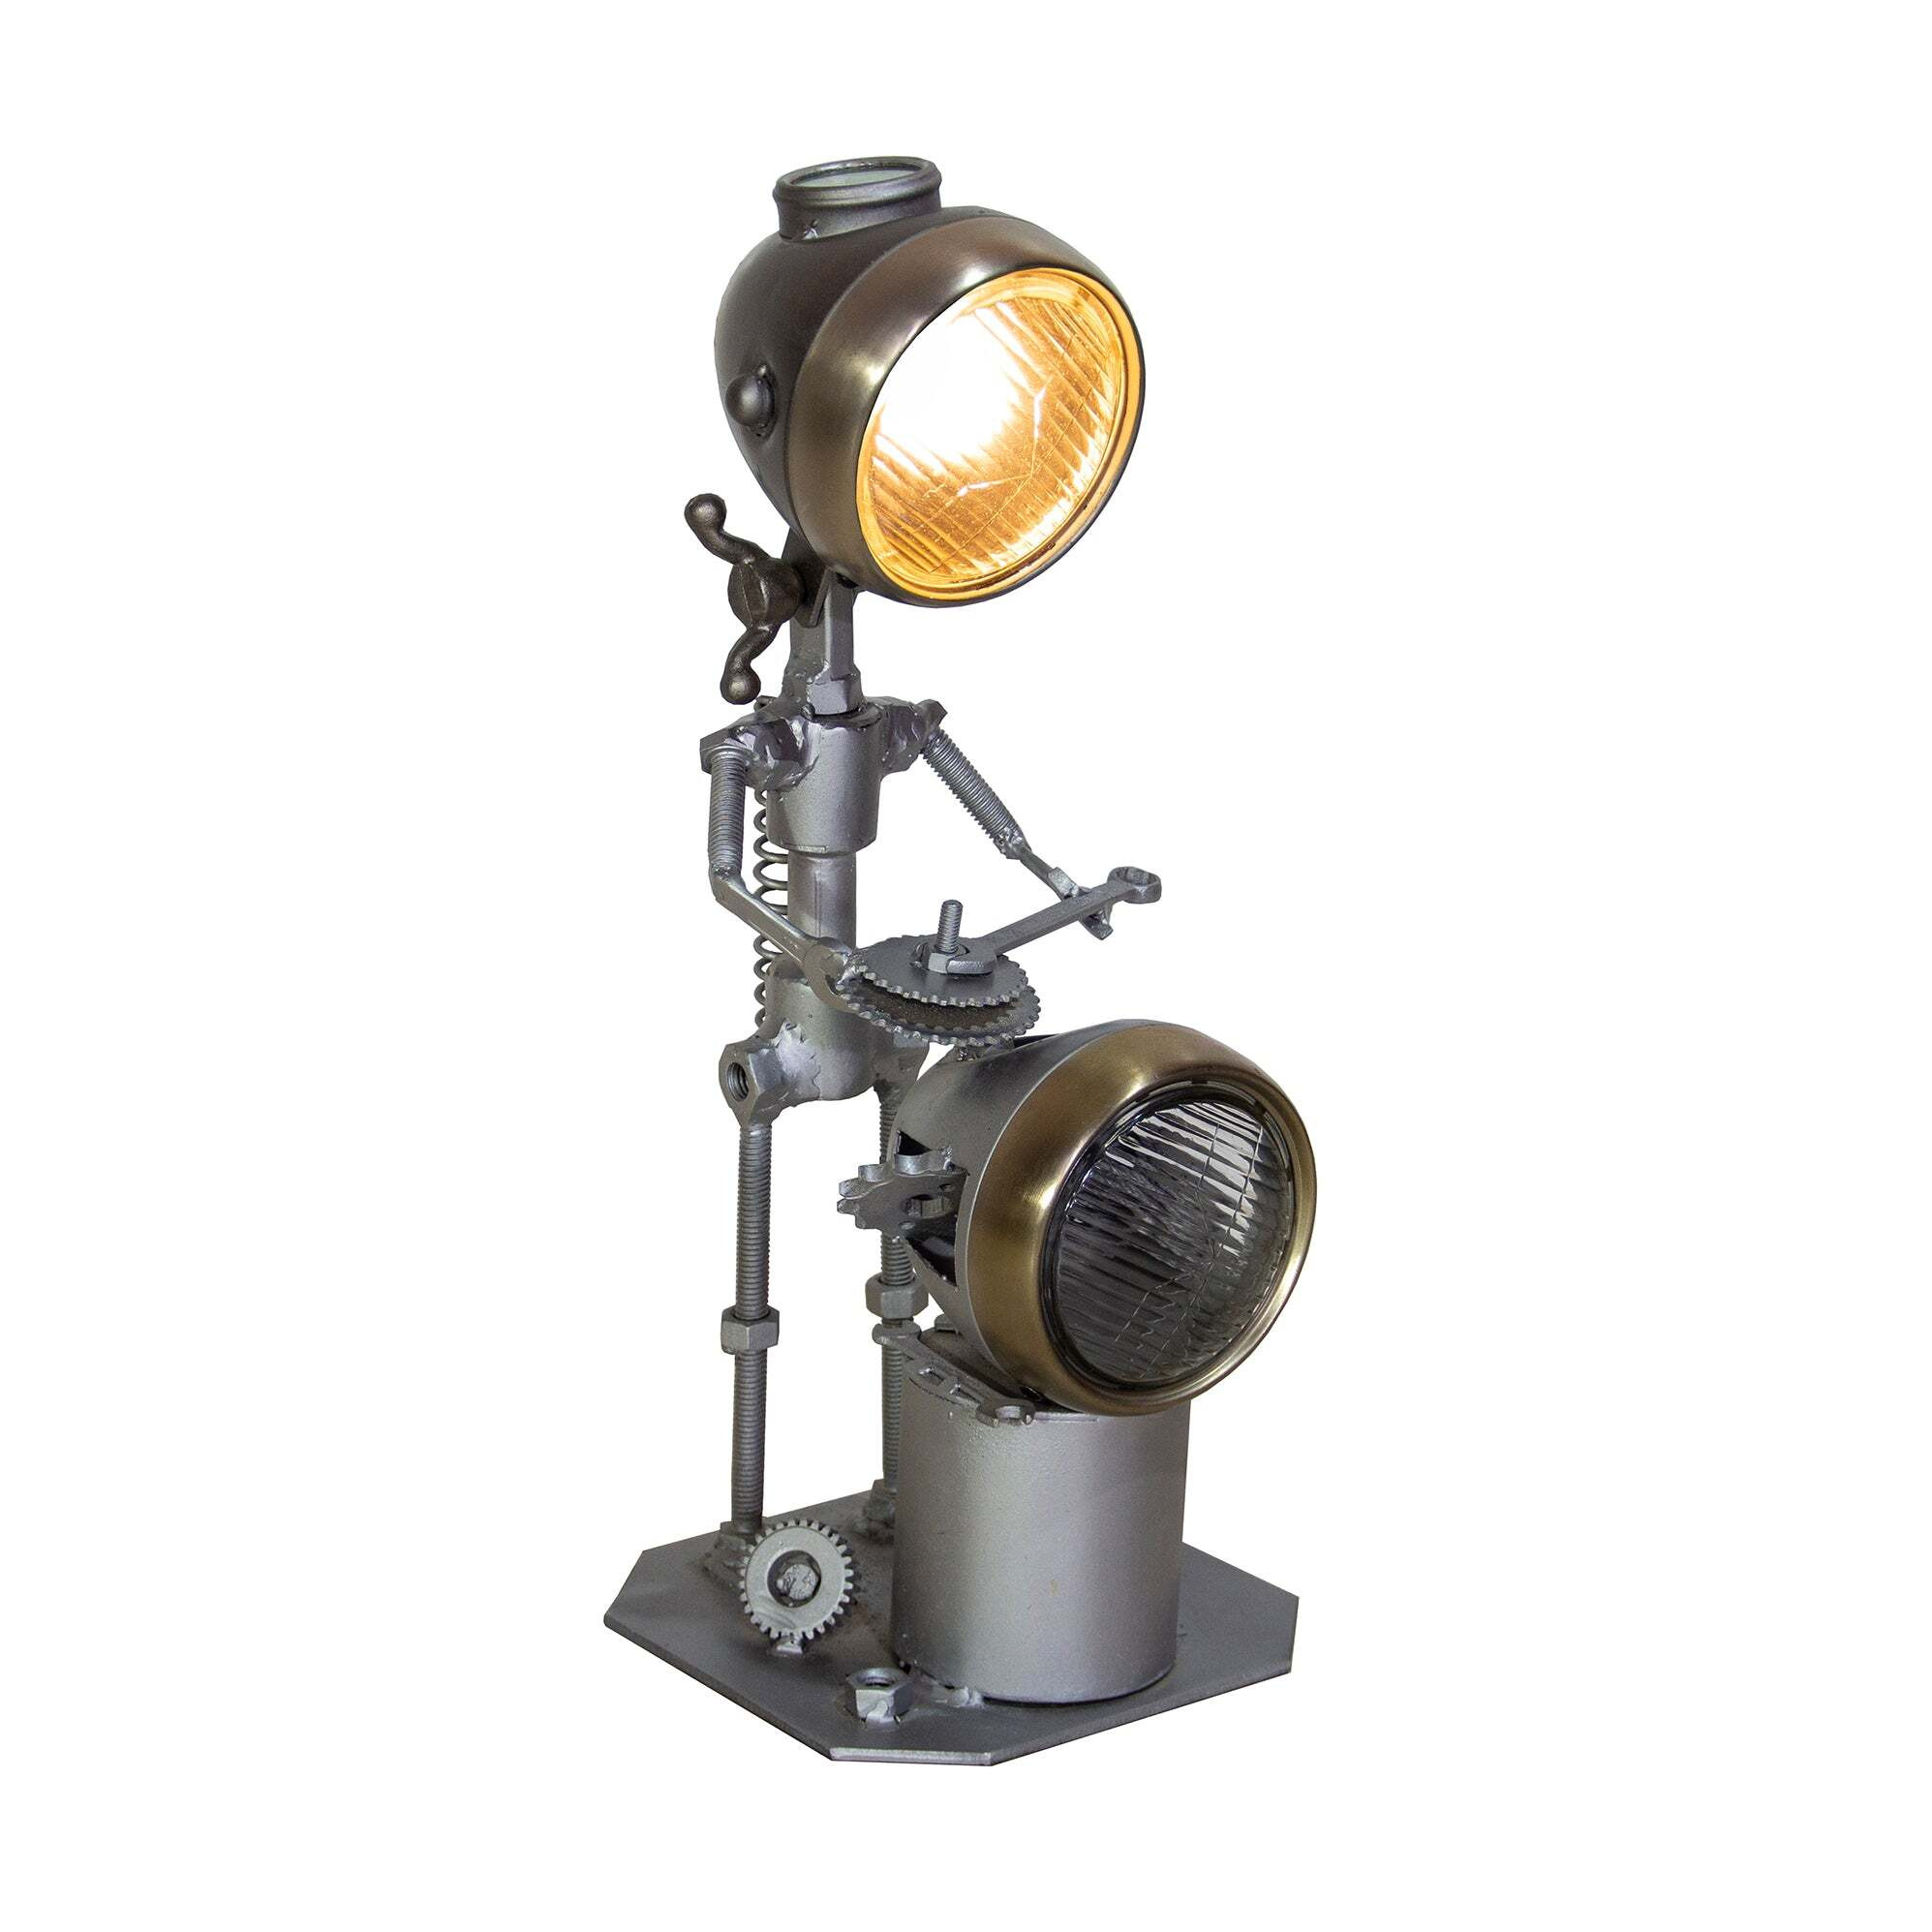 Reclaimed Parts Mechanic Table Lamp - image 1